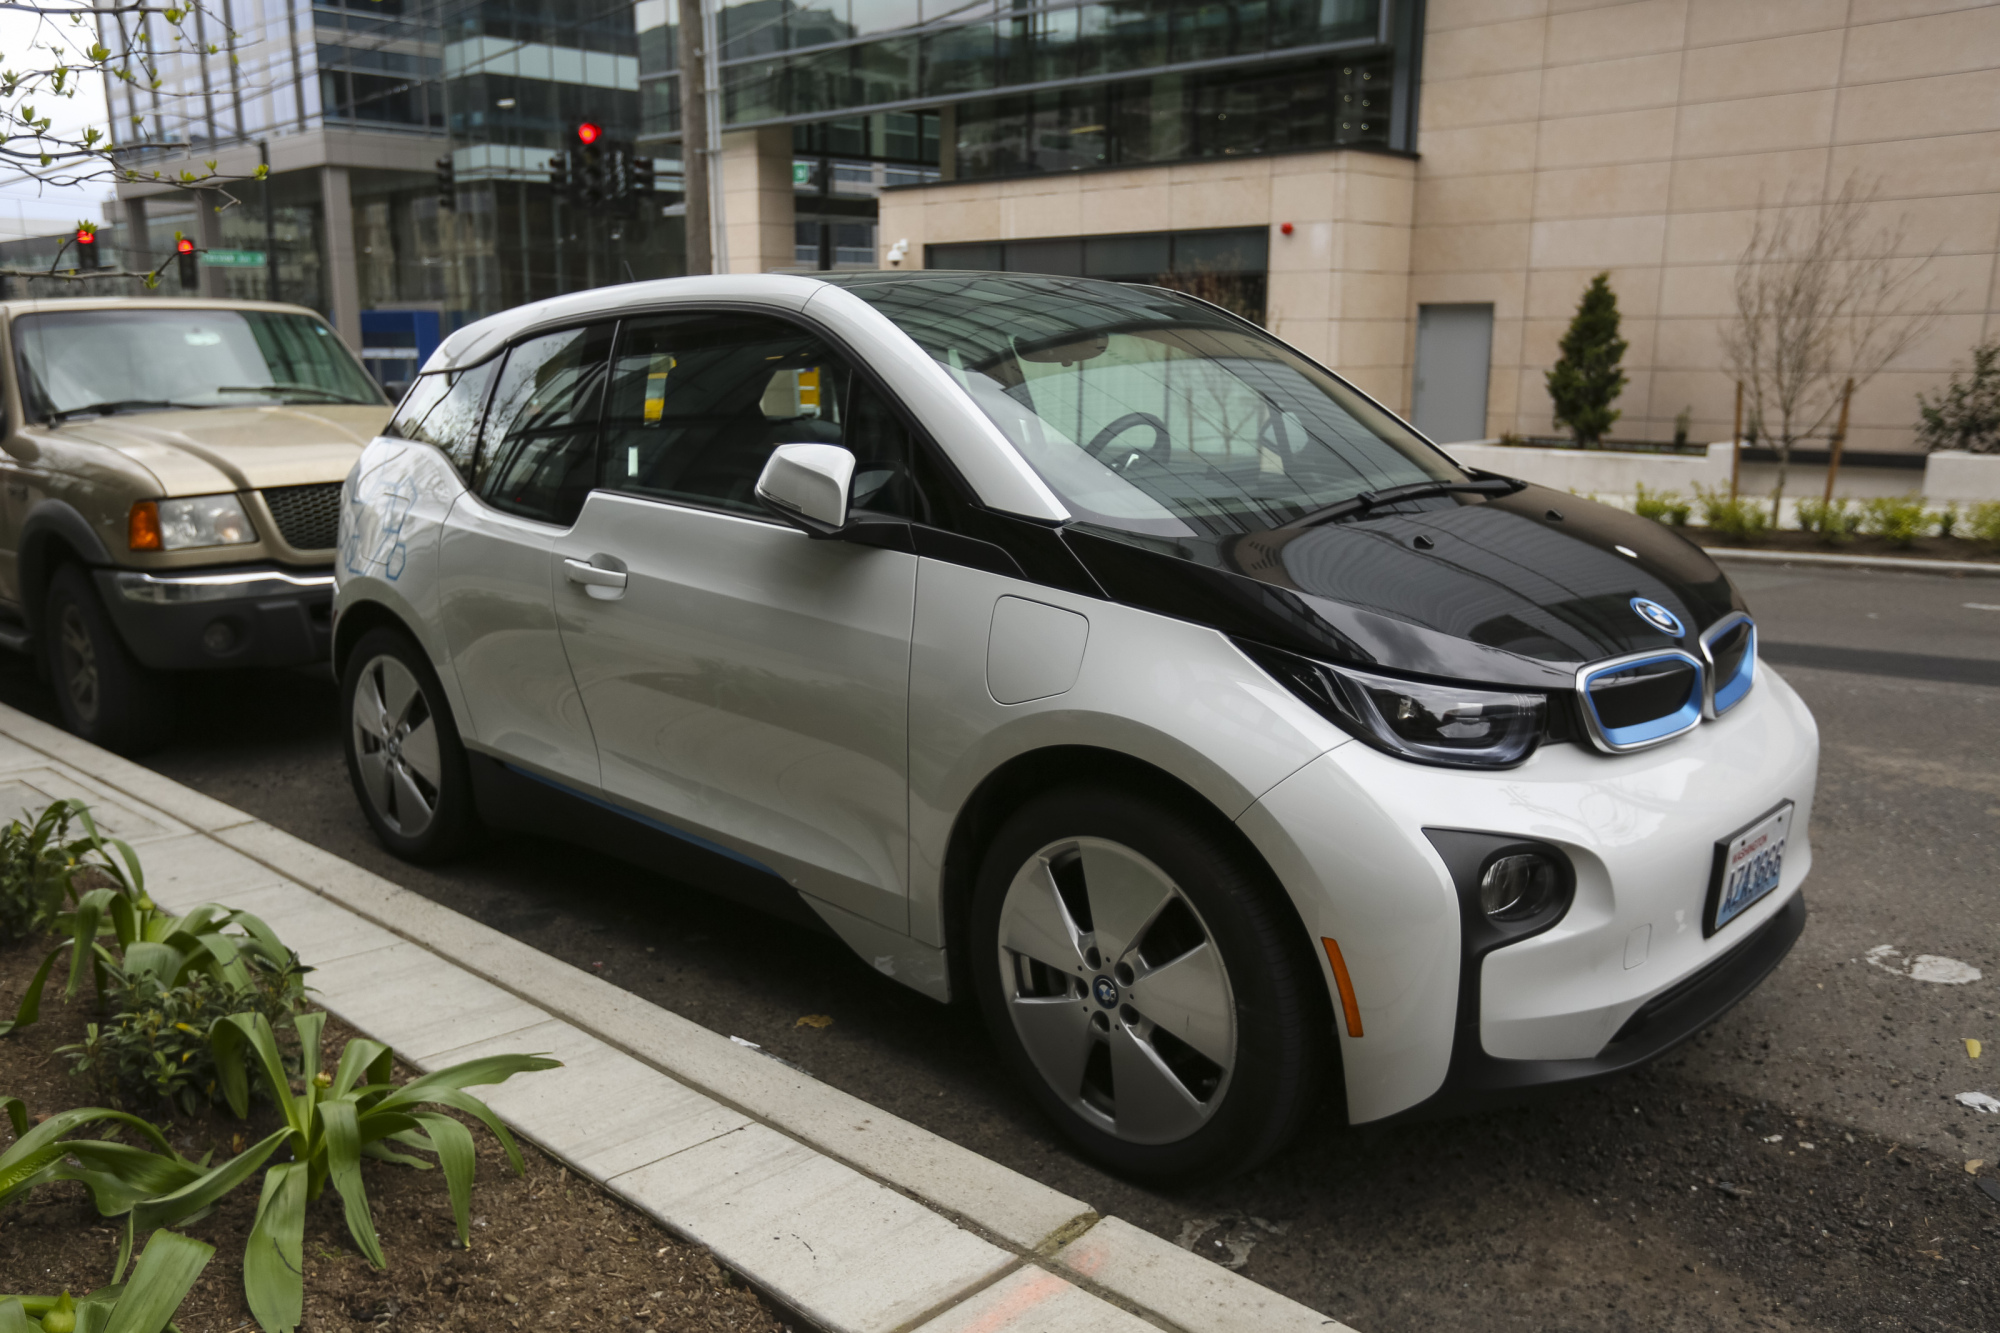 BMW's Discontinued i3 Is Already an EV Cult Classic - Bloomberg